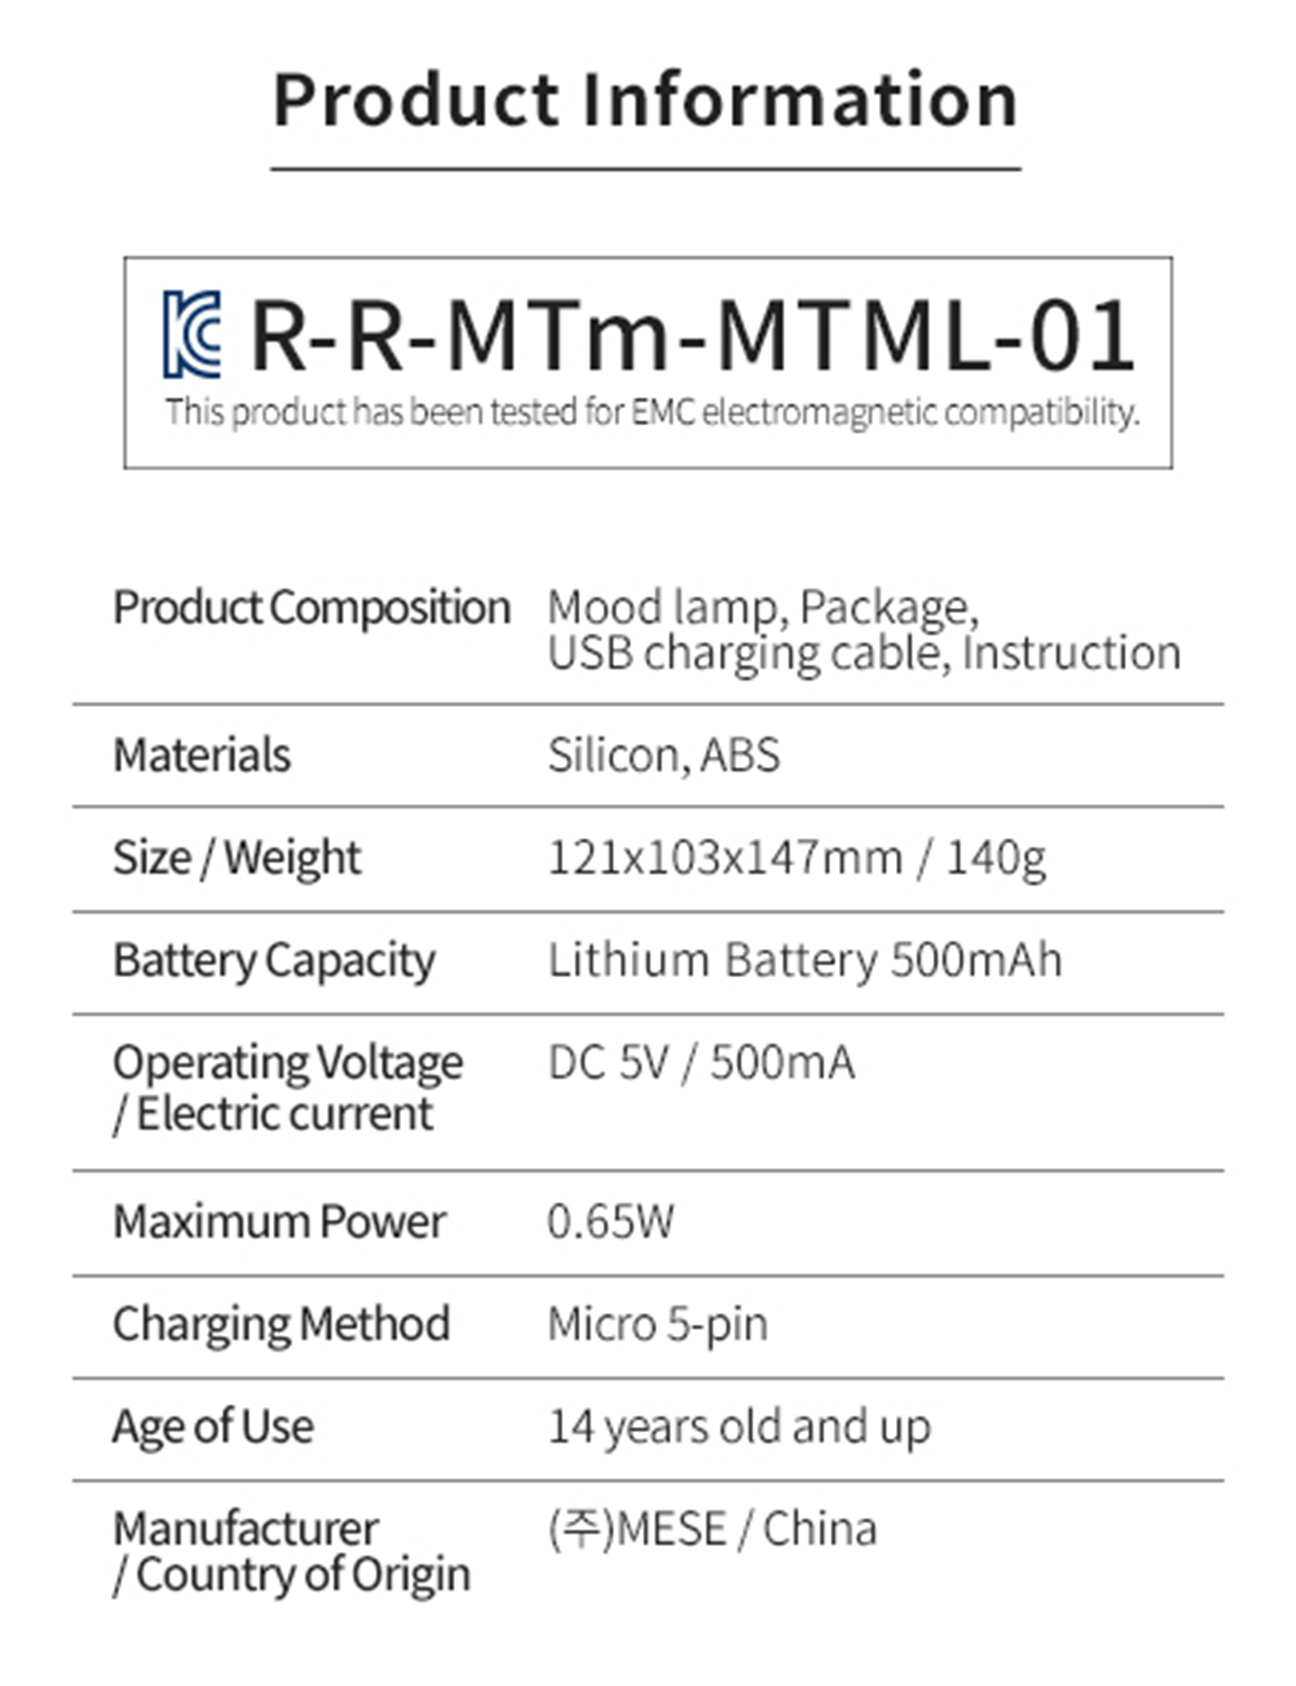 Product information sheet. The text reads: "This product has been tested for EMC electromagnetic compatibility. Product Composition: Mood Lamp, Package, USB charging cable, Instruction. Materials: Silicon, ABS. Size/Weight: 121x103x147mm. 140 grams. Battery Capacity: Lithium Battery 500mAh. Operating Voltage/Electric Current: DC5V / 500mA. Maximum power: 0.65W. Charging method: Micro 5-pin. Age of Use: 14 years old and up. Manufacturer/Country of Origin: MESE/China."